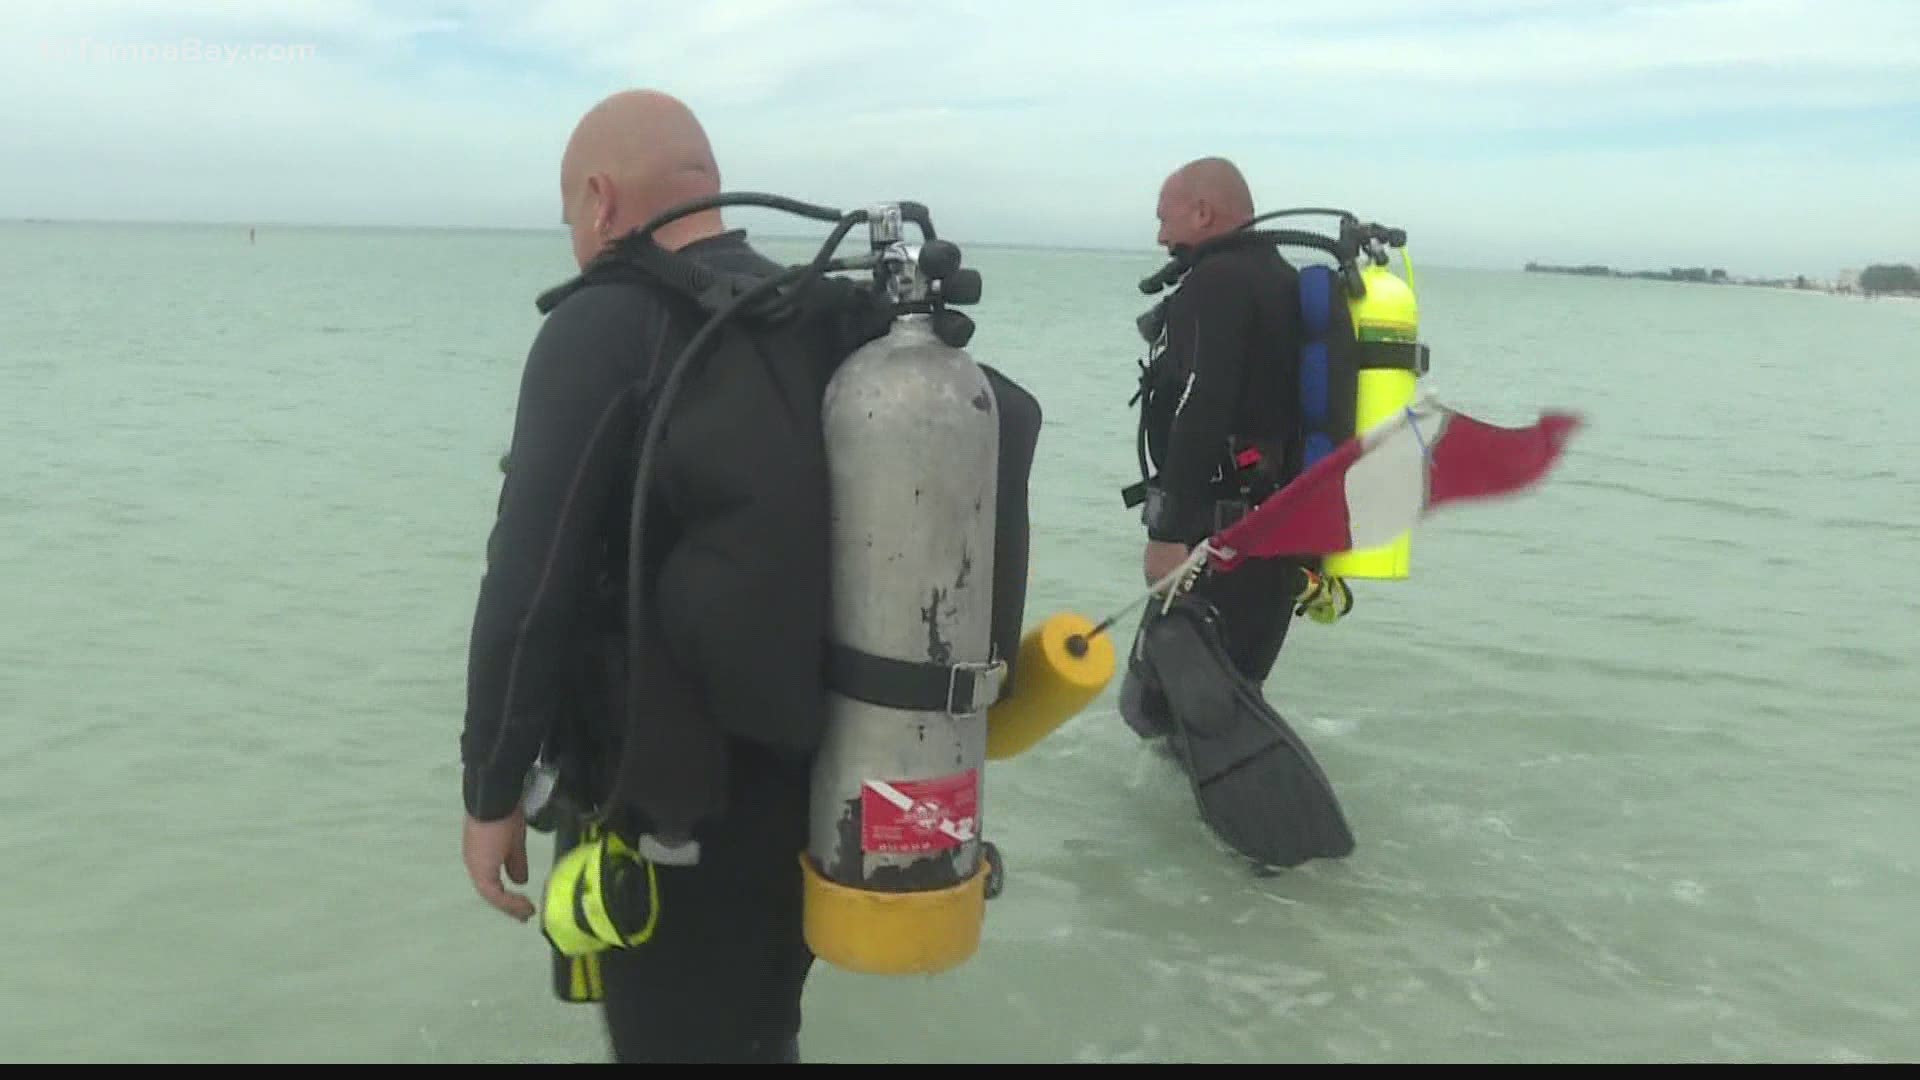 Fifty-five divers scoured the Gulf for debris and discarded fishing gear in the area.